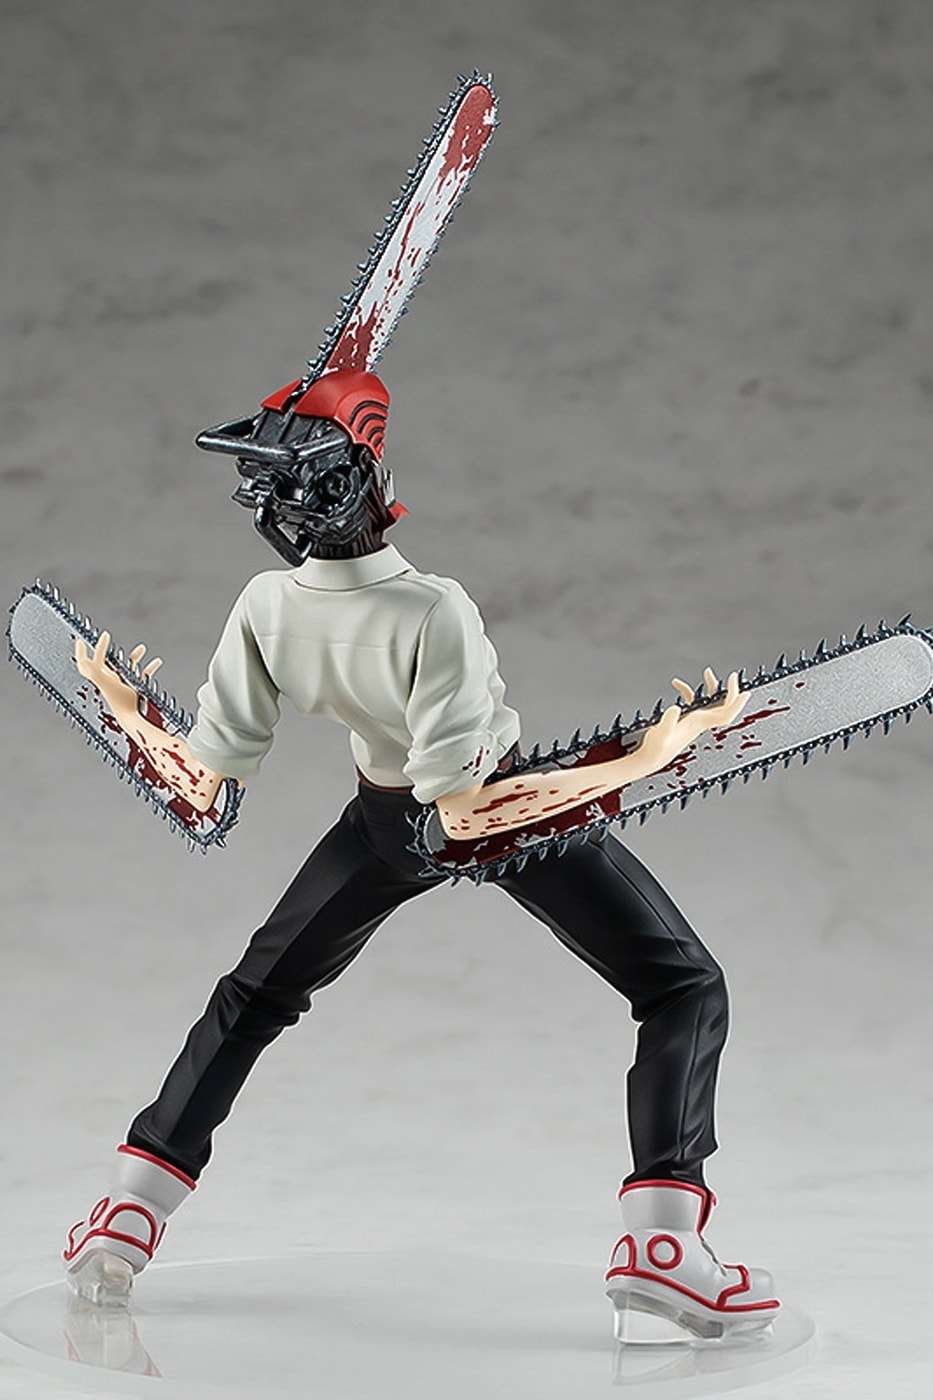 Goodsmile Company Releases a 'Chainsaw Man' Figure